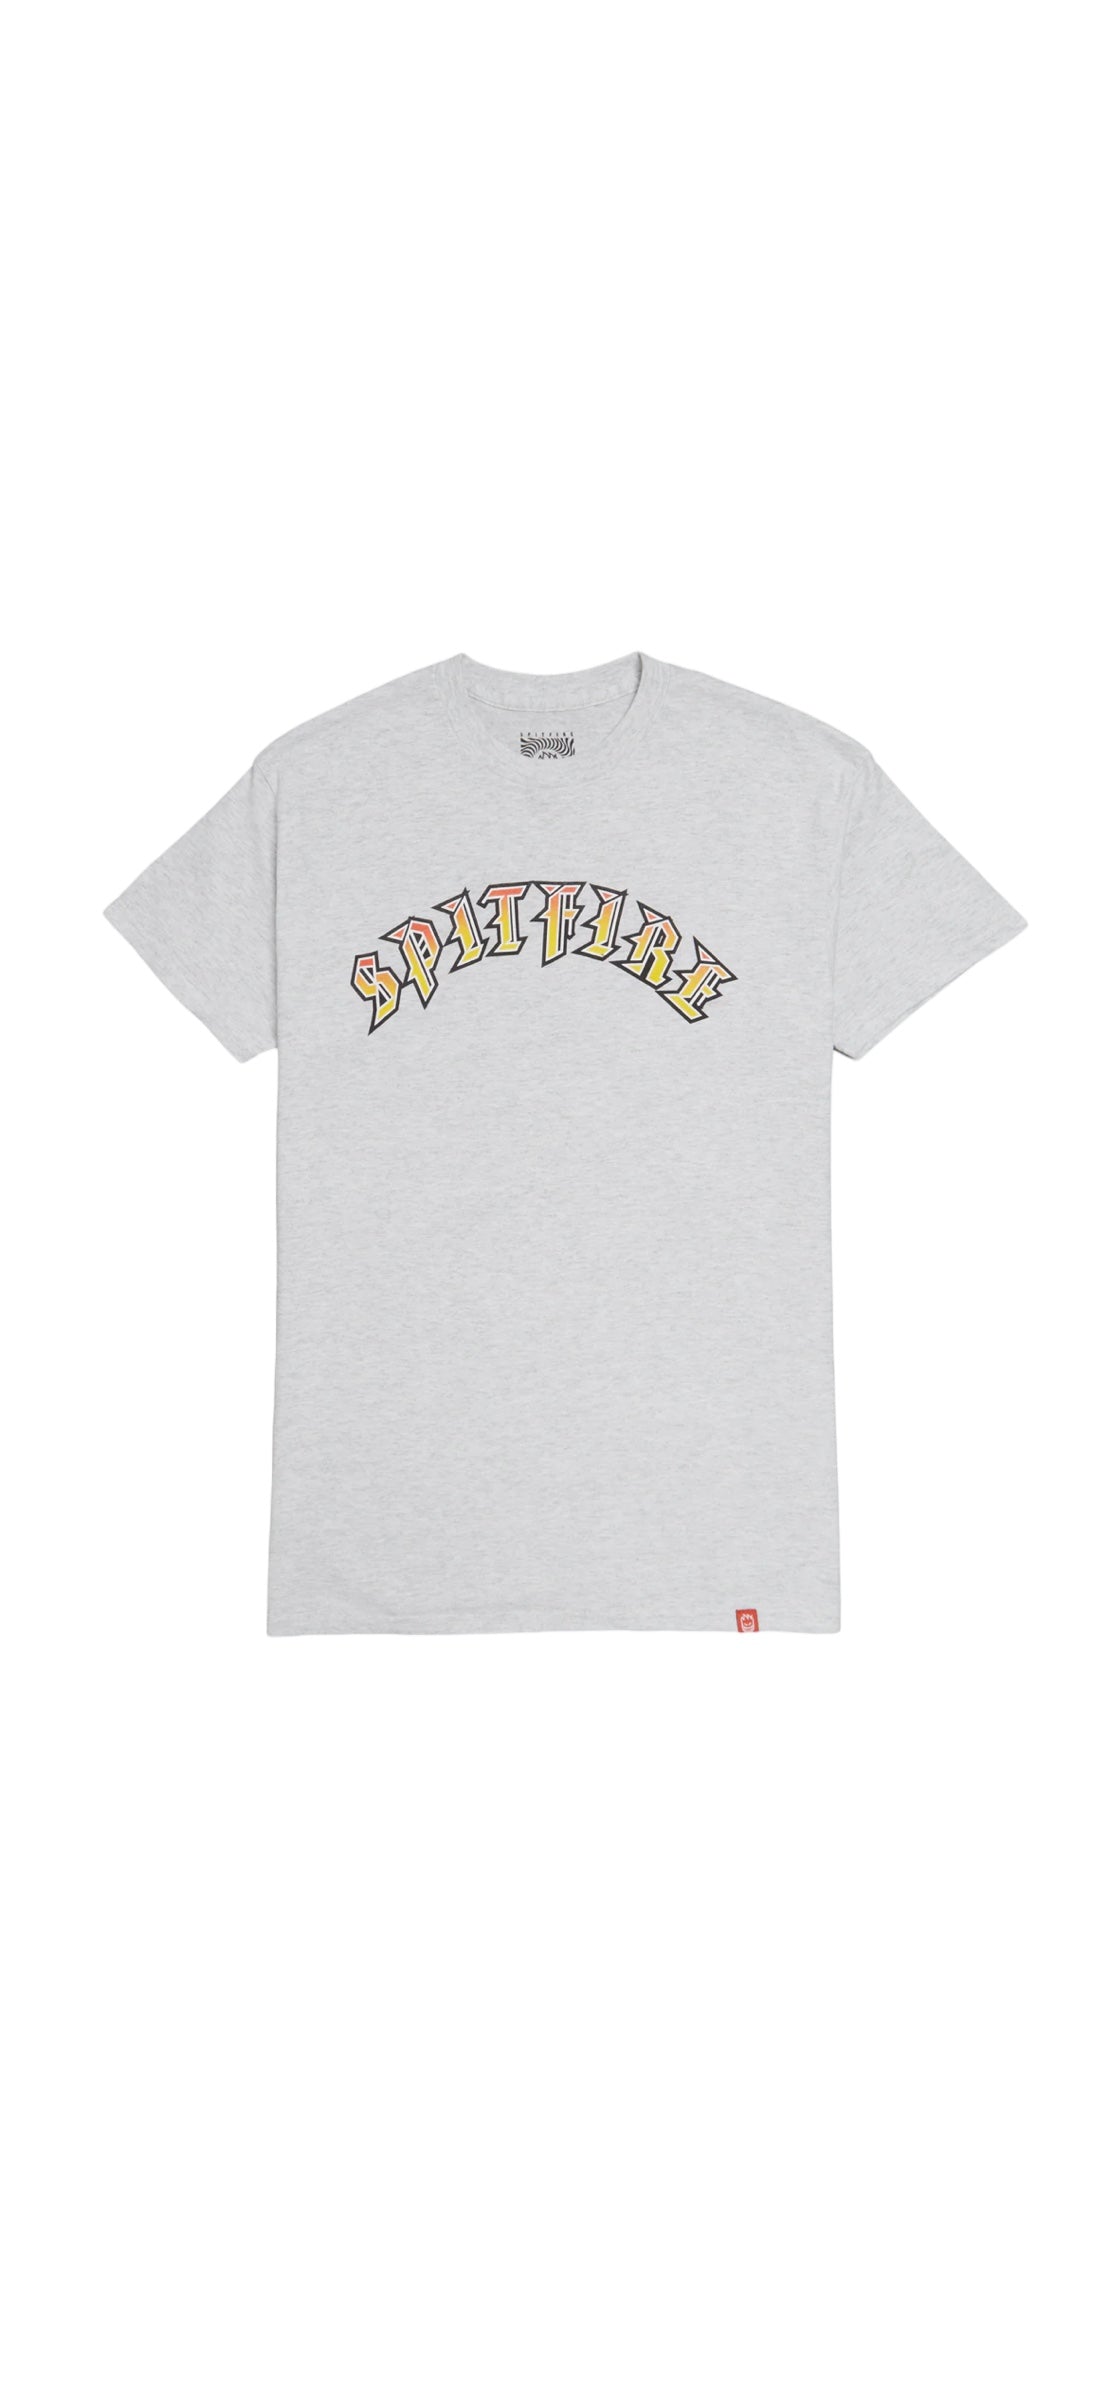 Spitfire S/S Old English Tee